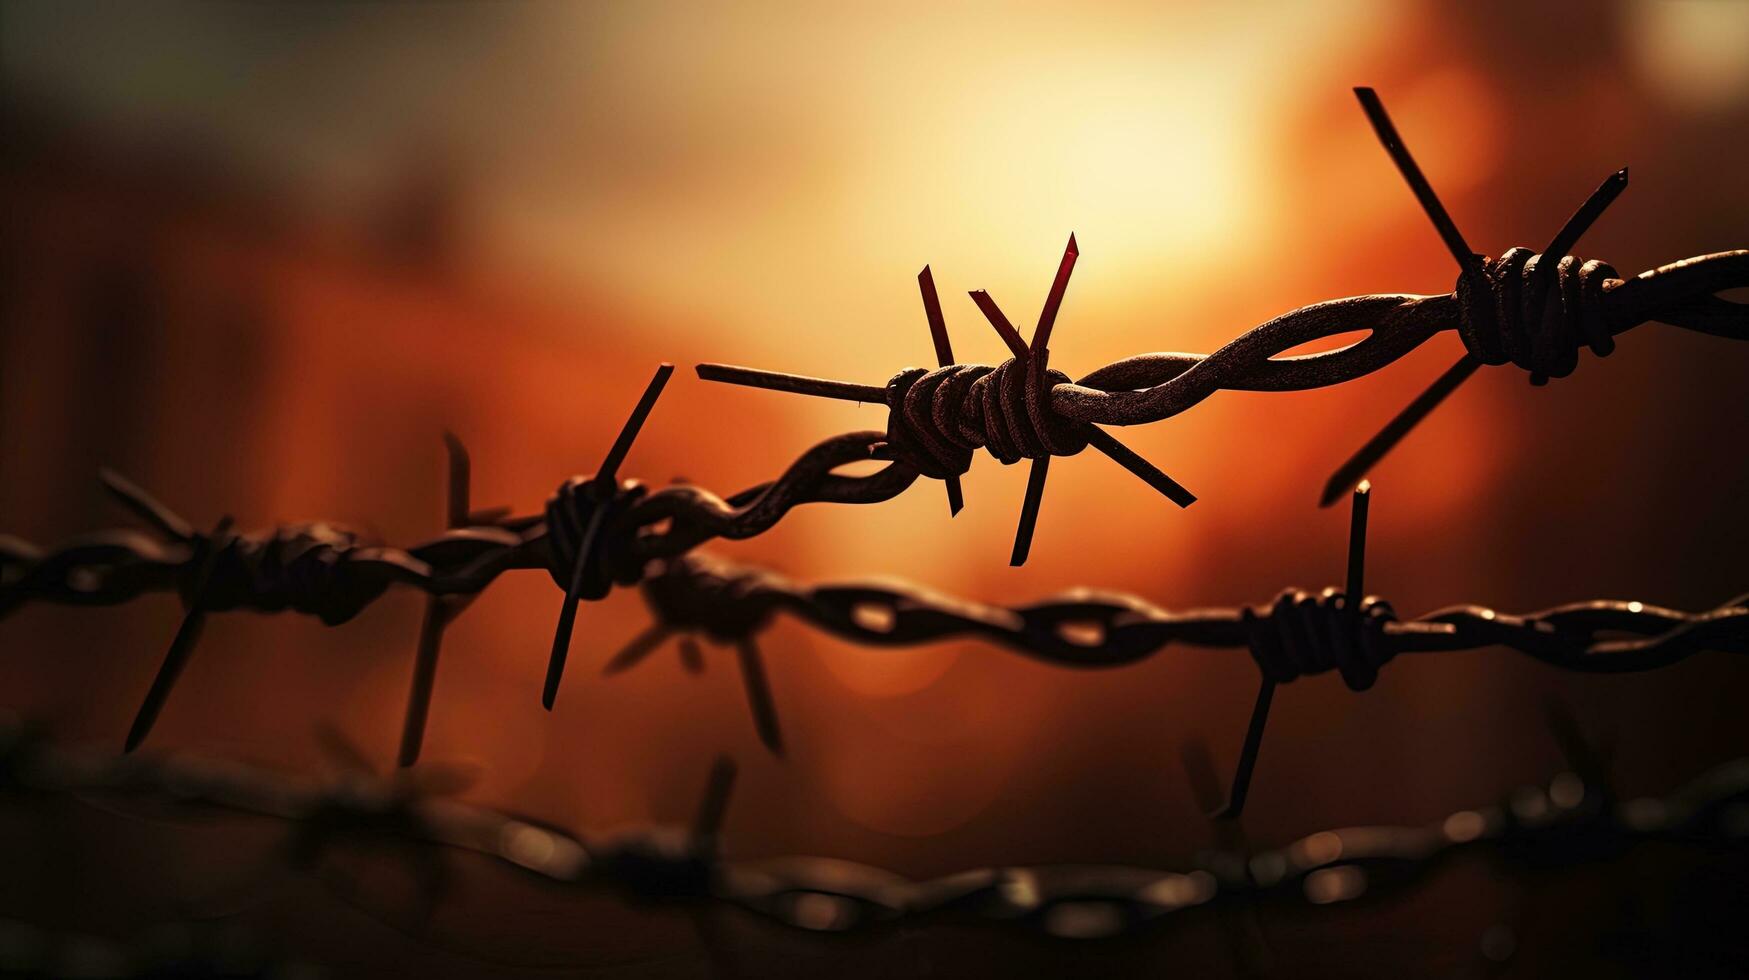 Selective Focus on wall with aged barbed wire fence. silhouette concept photo